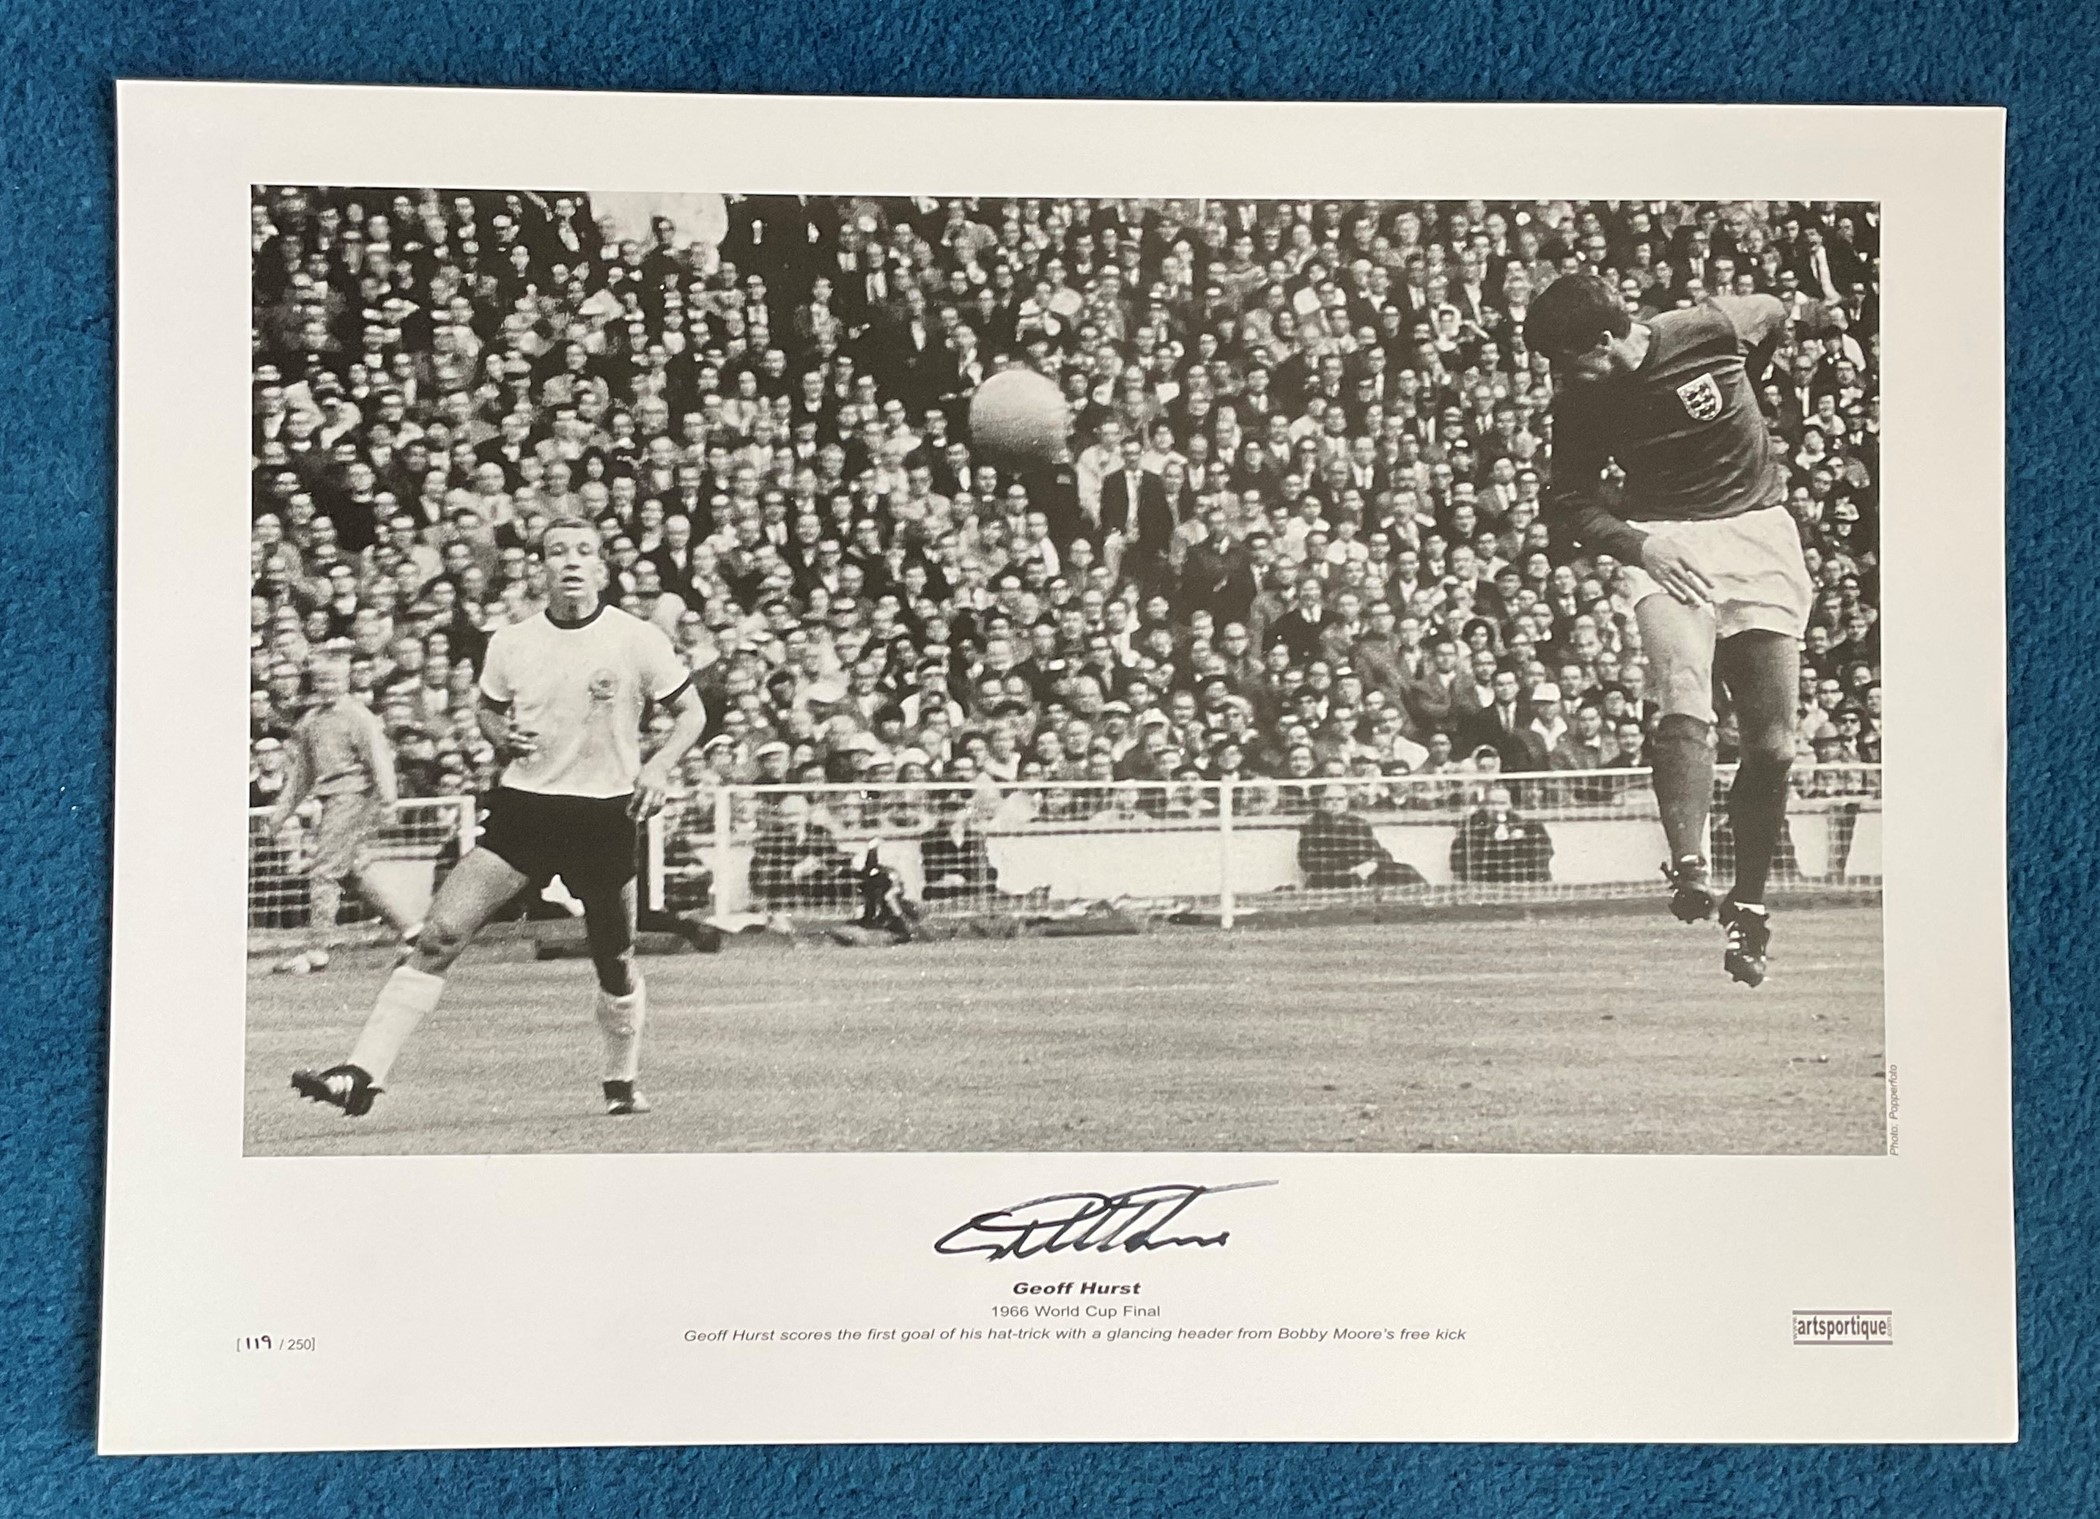 Geoff Hurst signed 22x16 1966 World Cup Final black and white print Geoff Hurst scores the first